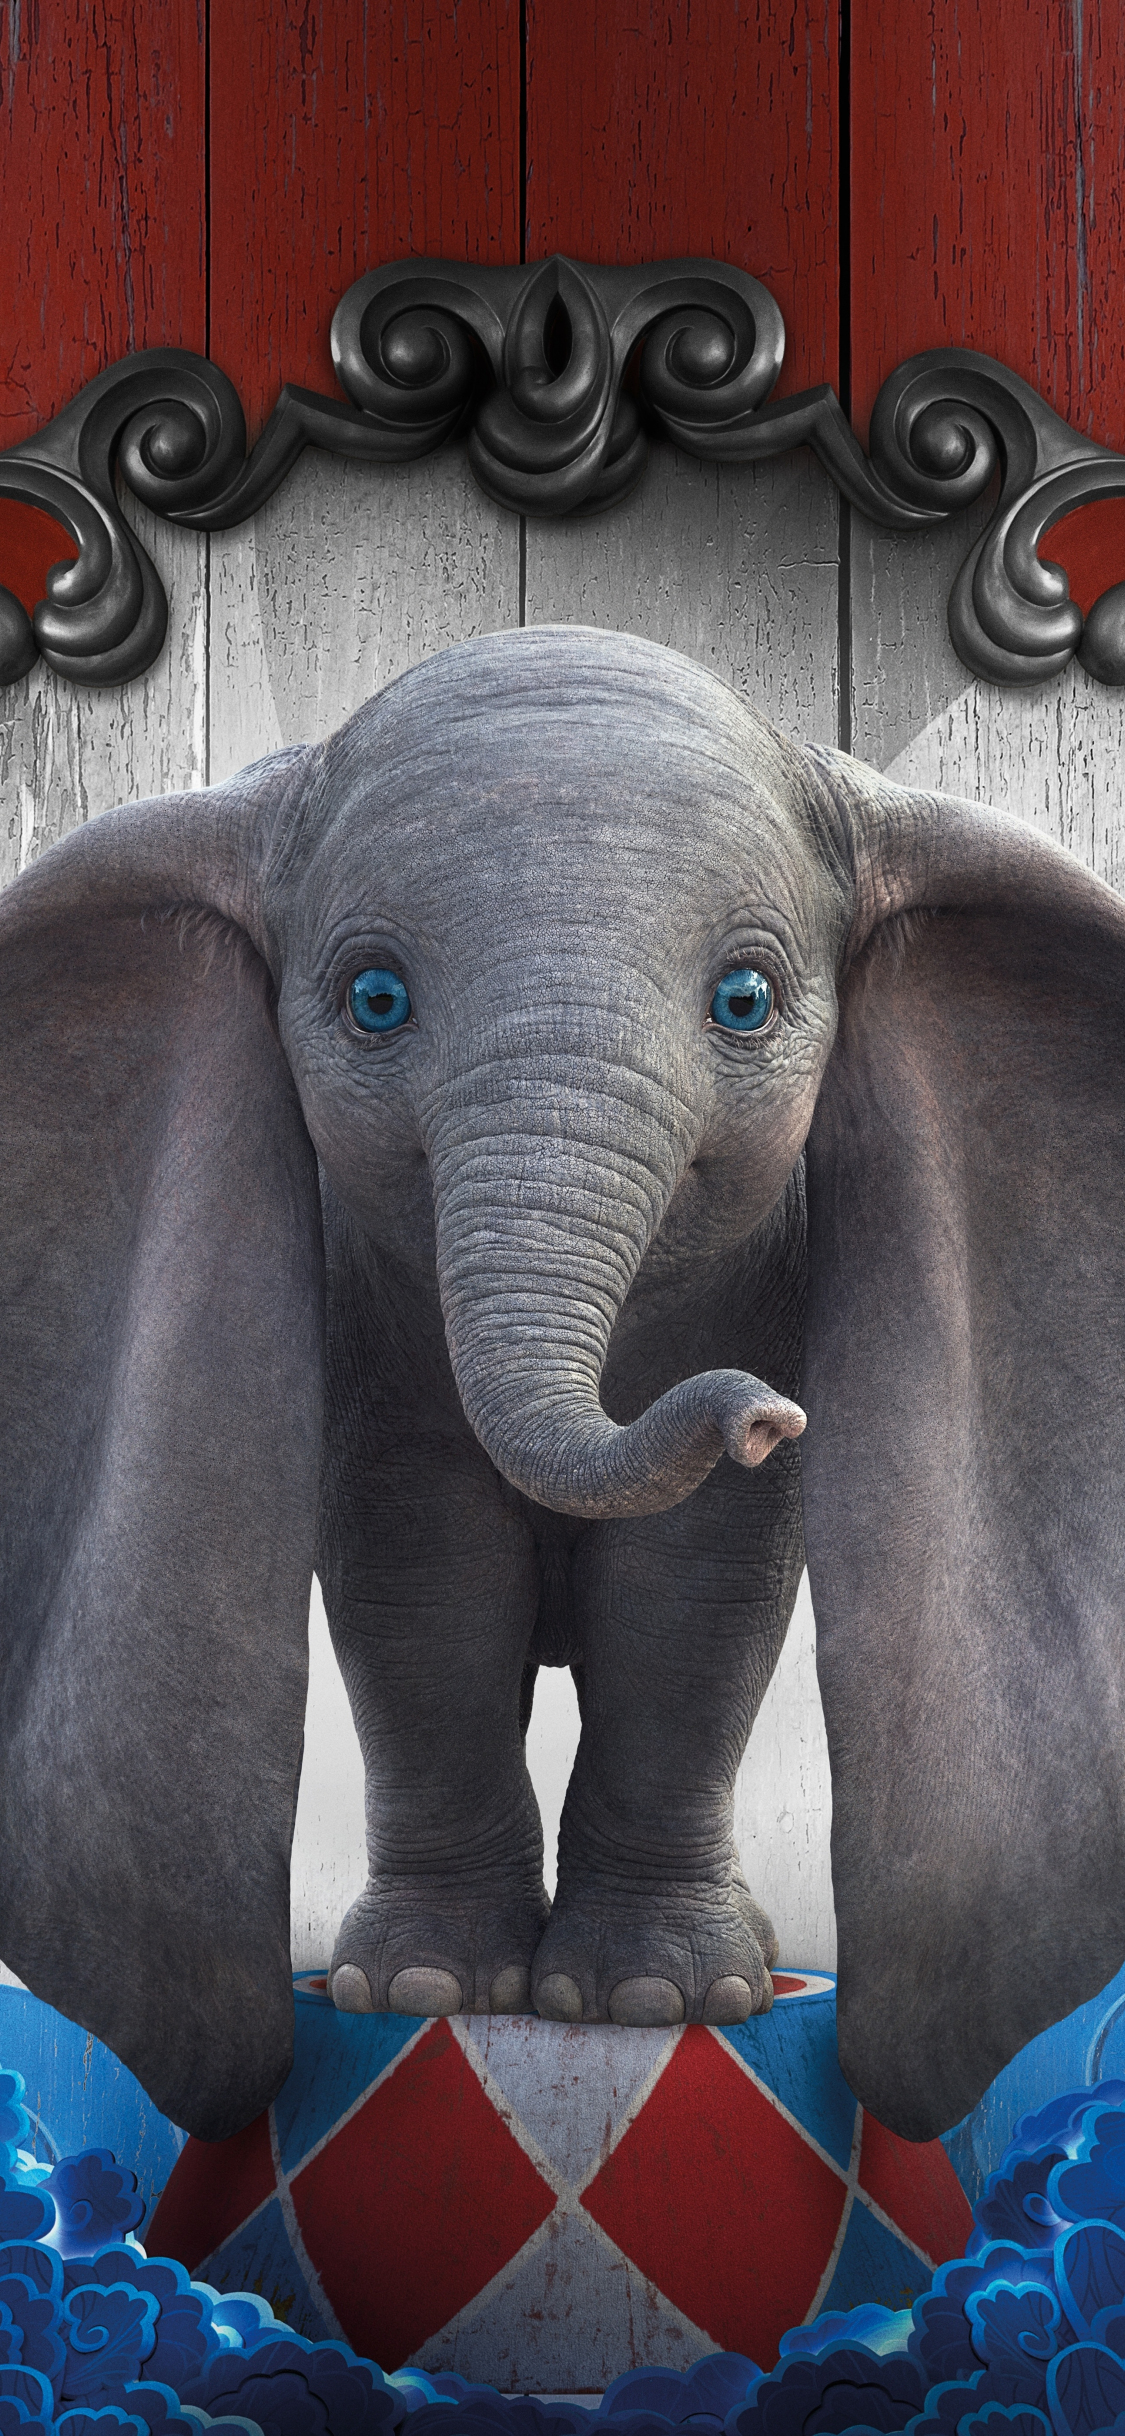 Download wallpaper 1125x2436 dumbo cute baby elephant 2019 movie iphone  x 1125x2436 hd background 18585